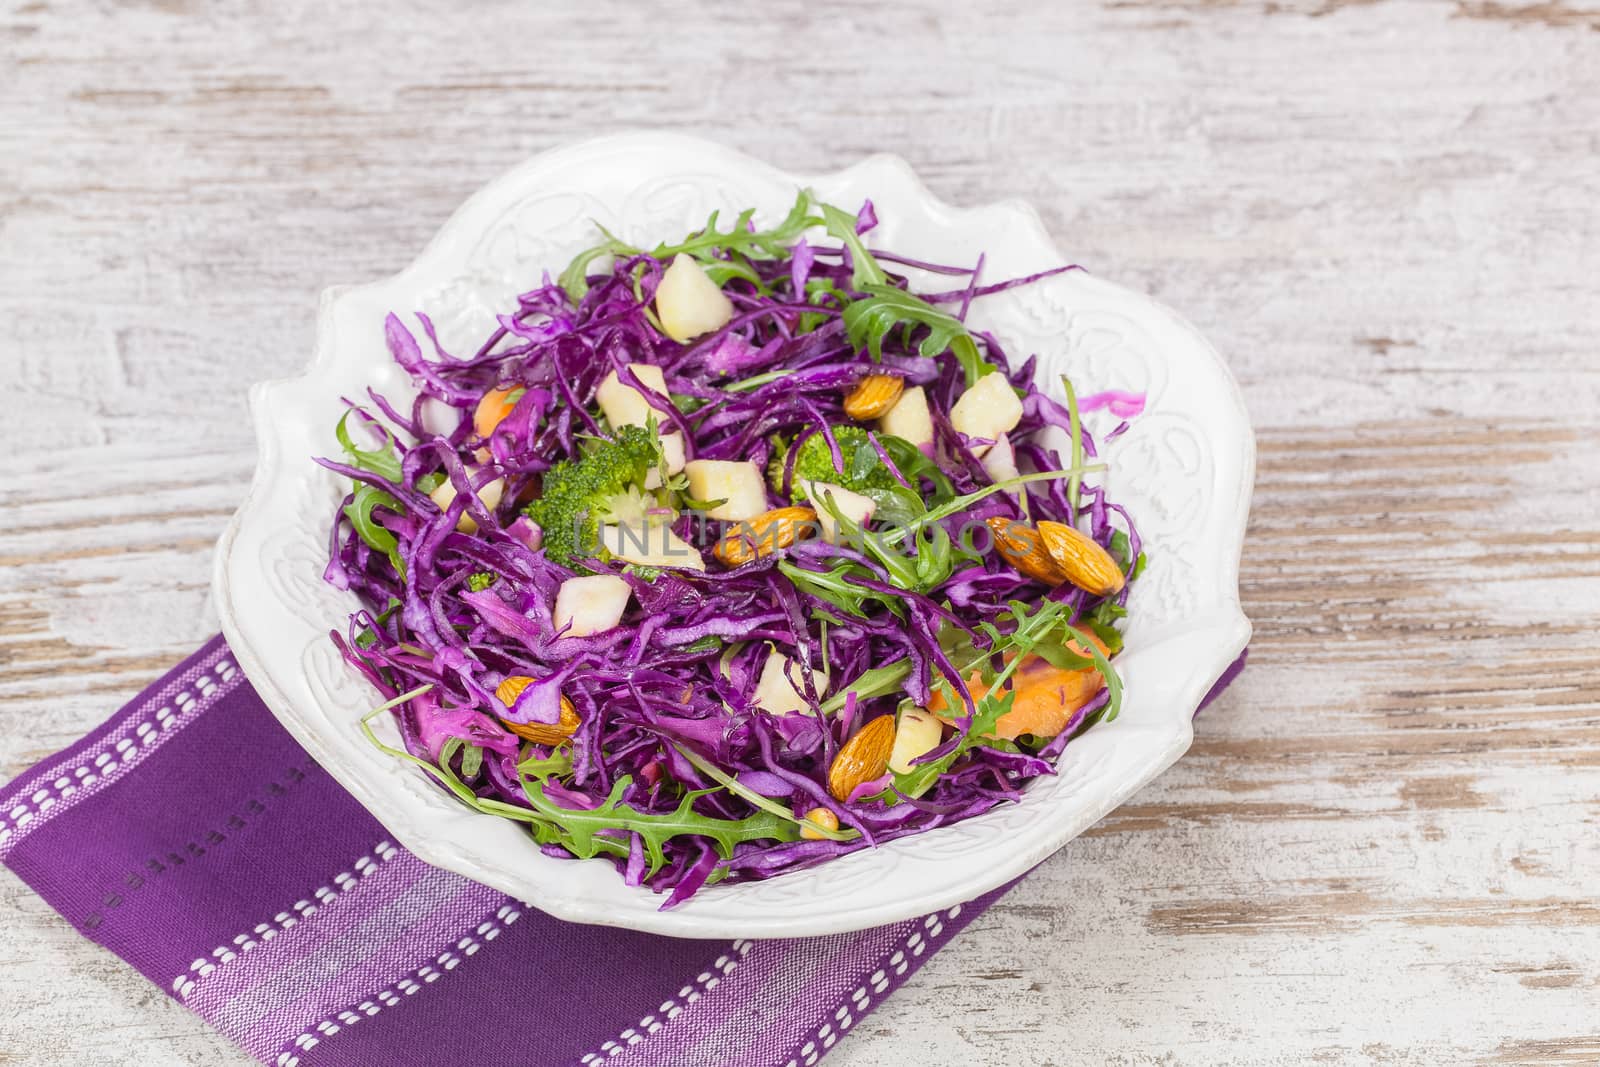 Red cabbage salad by Slast20